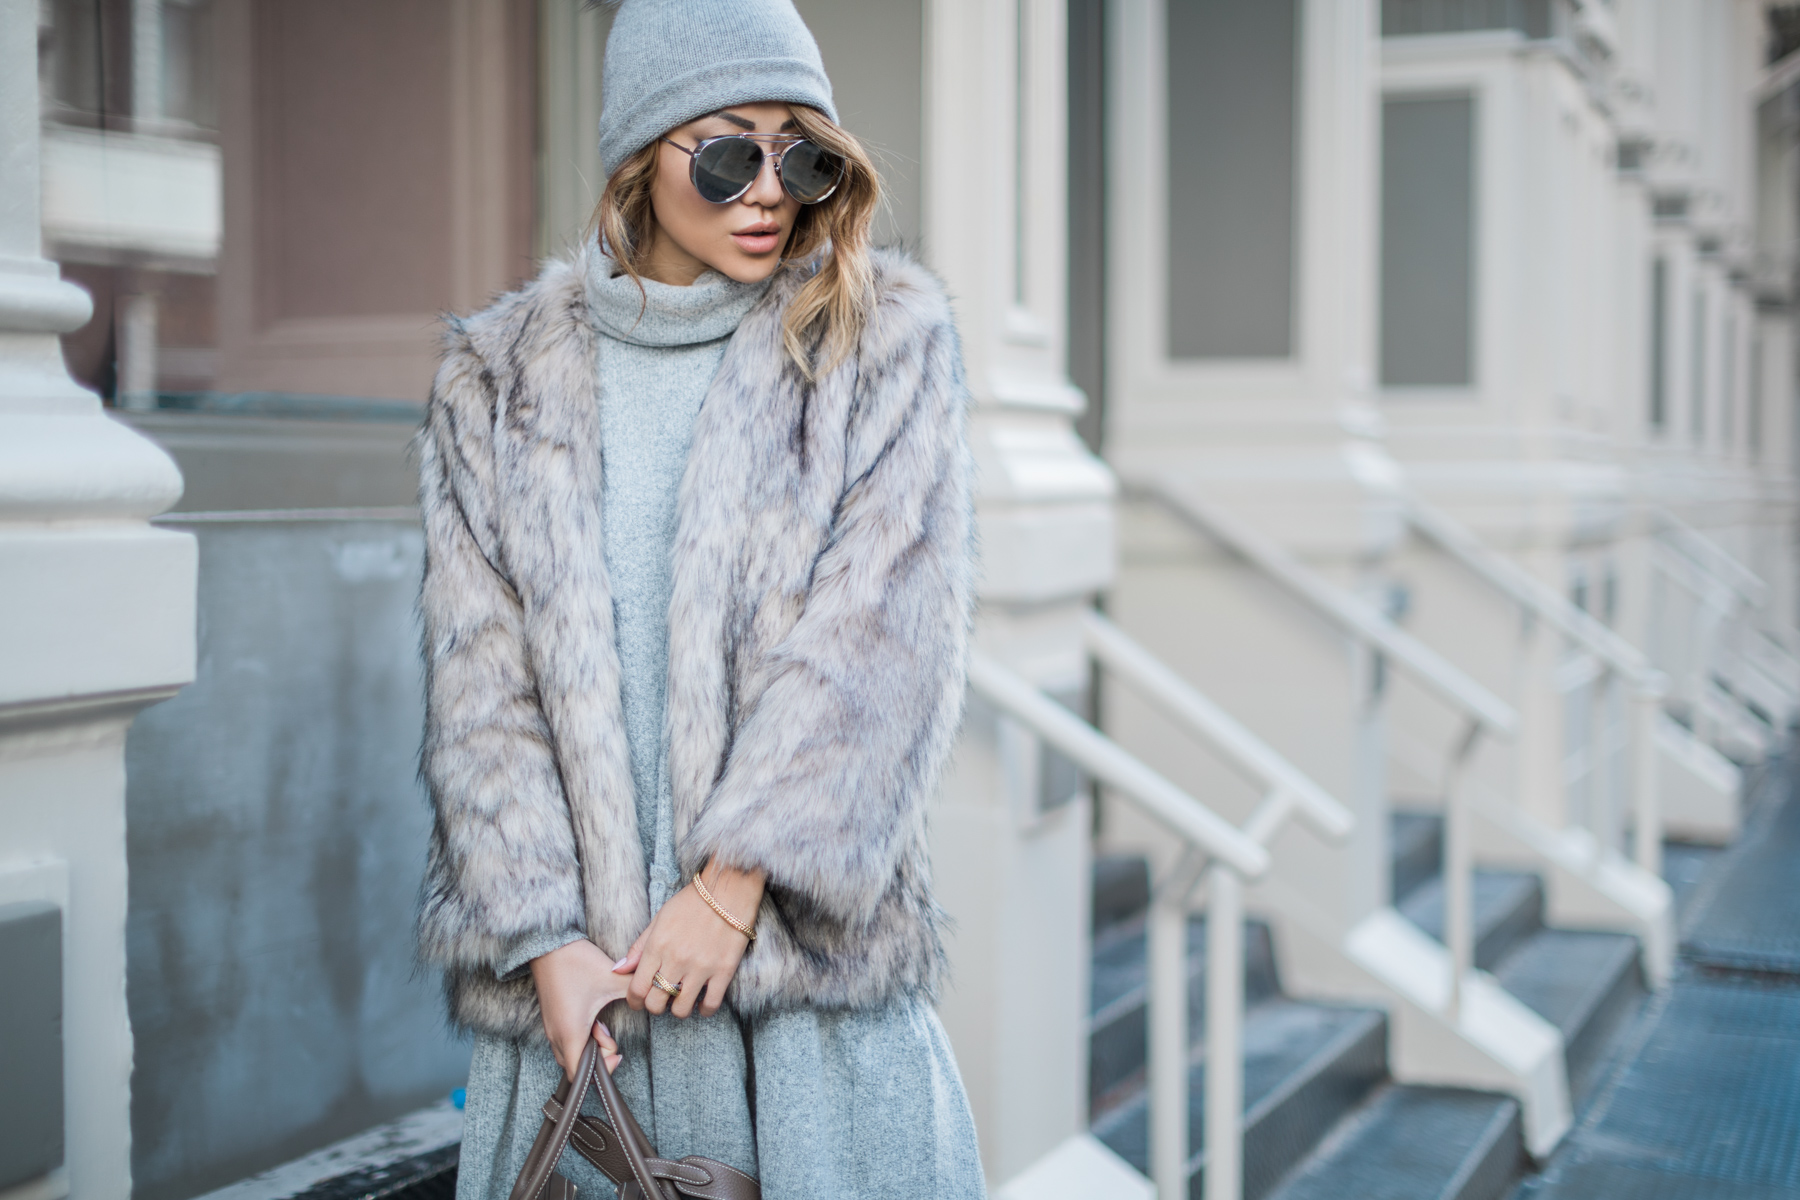 Essential Winter Coats Every Girl Should Own - Faux Fur Coat // jessicawang.com